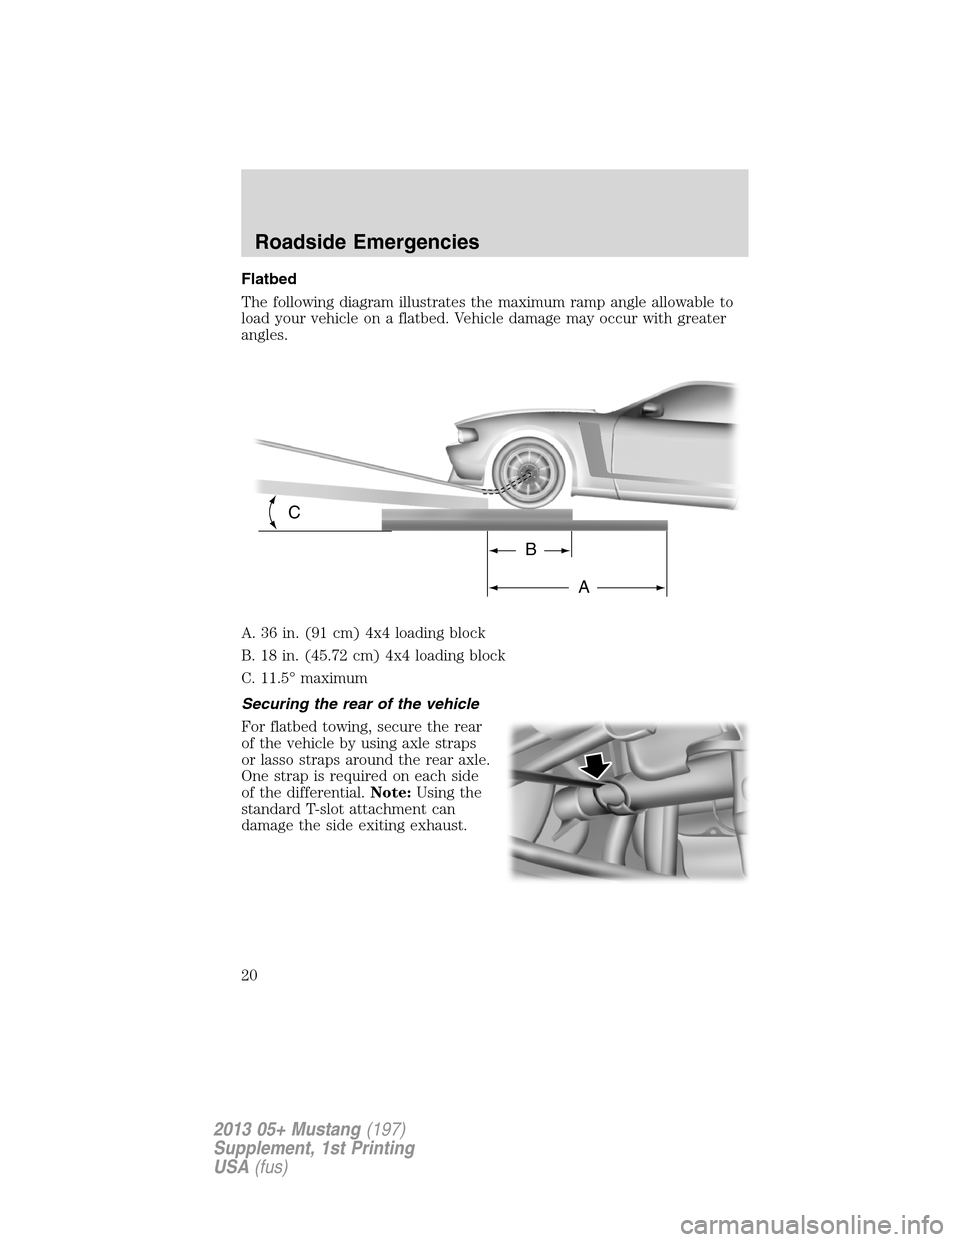 FORD MUSTANG 2013 5.G Boss 302 Supplement Manual Flatbed
The following diagram illustrates the maximum ramp angle allowable to
load your vehicle on a flatbed. Vehicle damage may occur with greater
angles.
A. 36 in. (91 cm) 4x4 loading block
B. 18 in